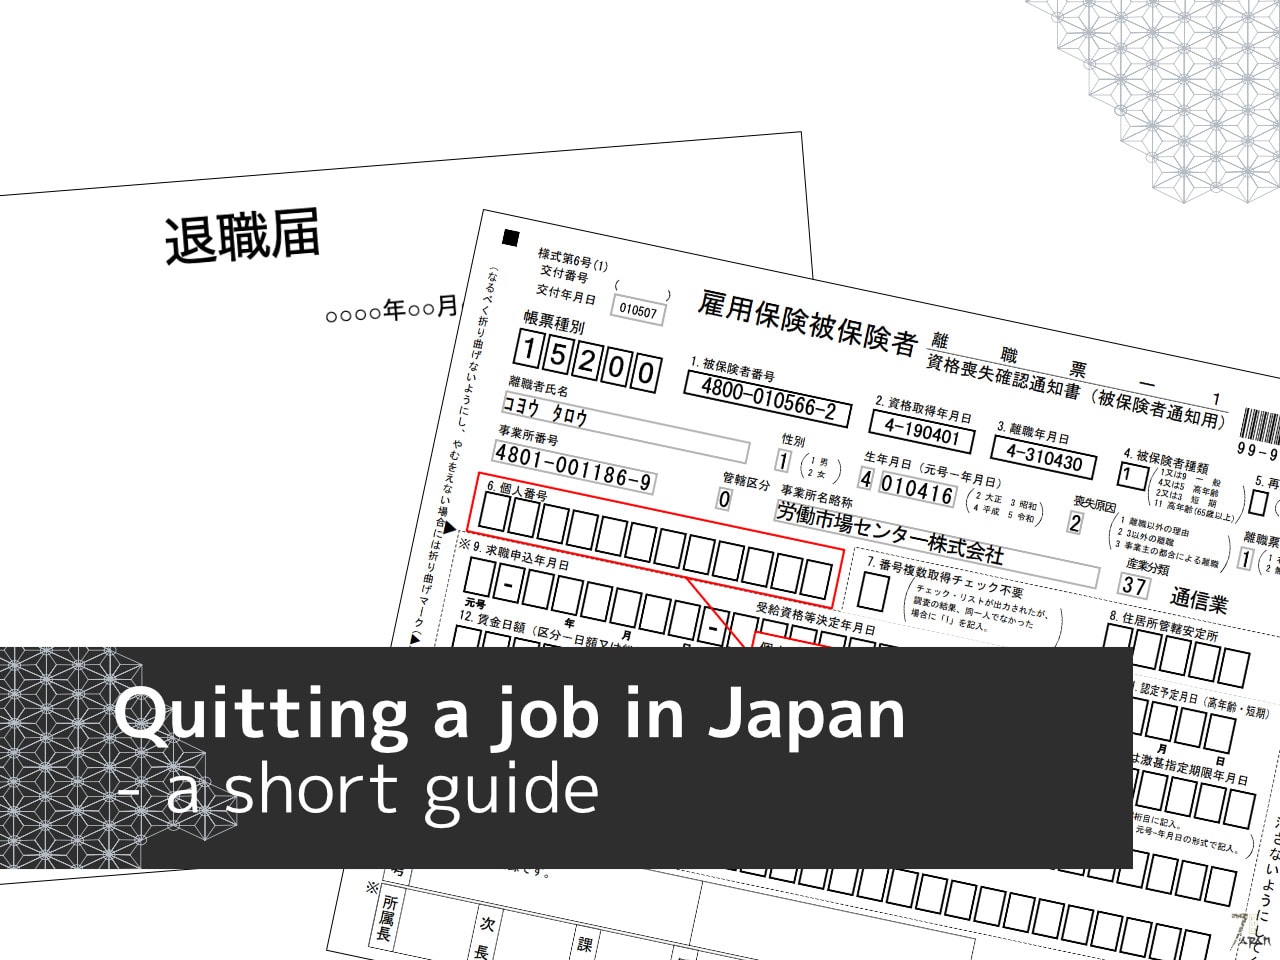 Quitting a job in Japan